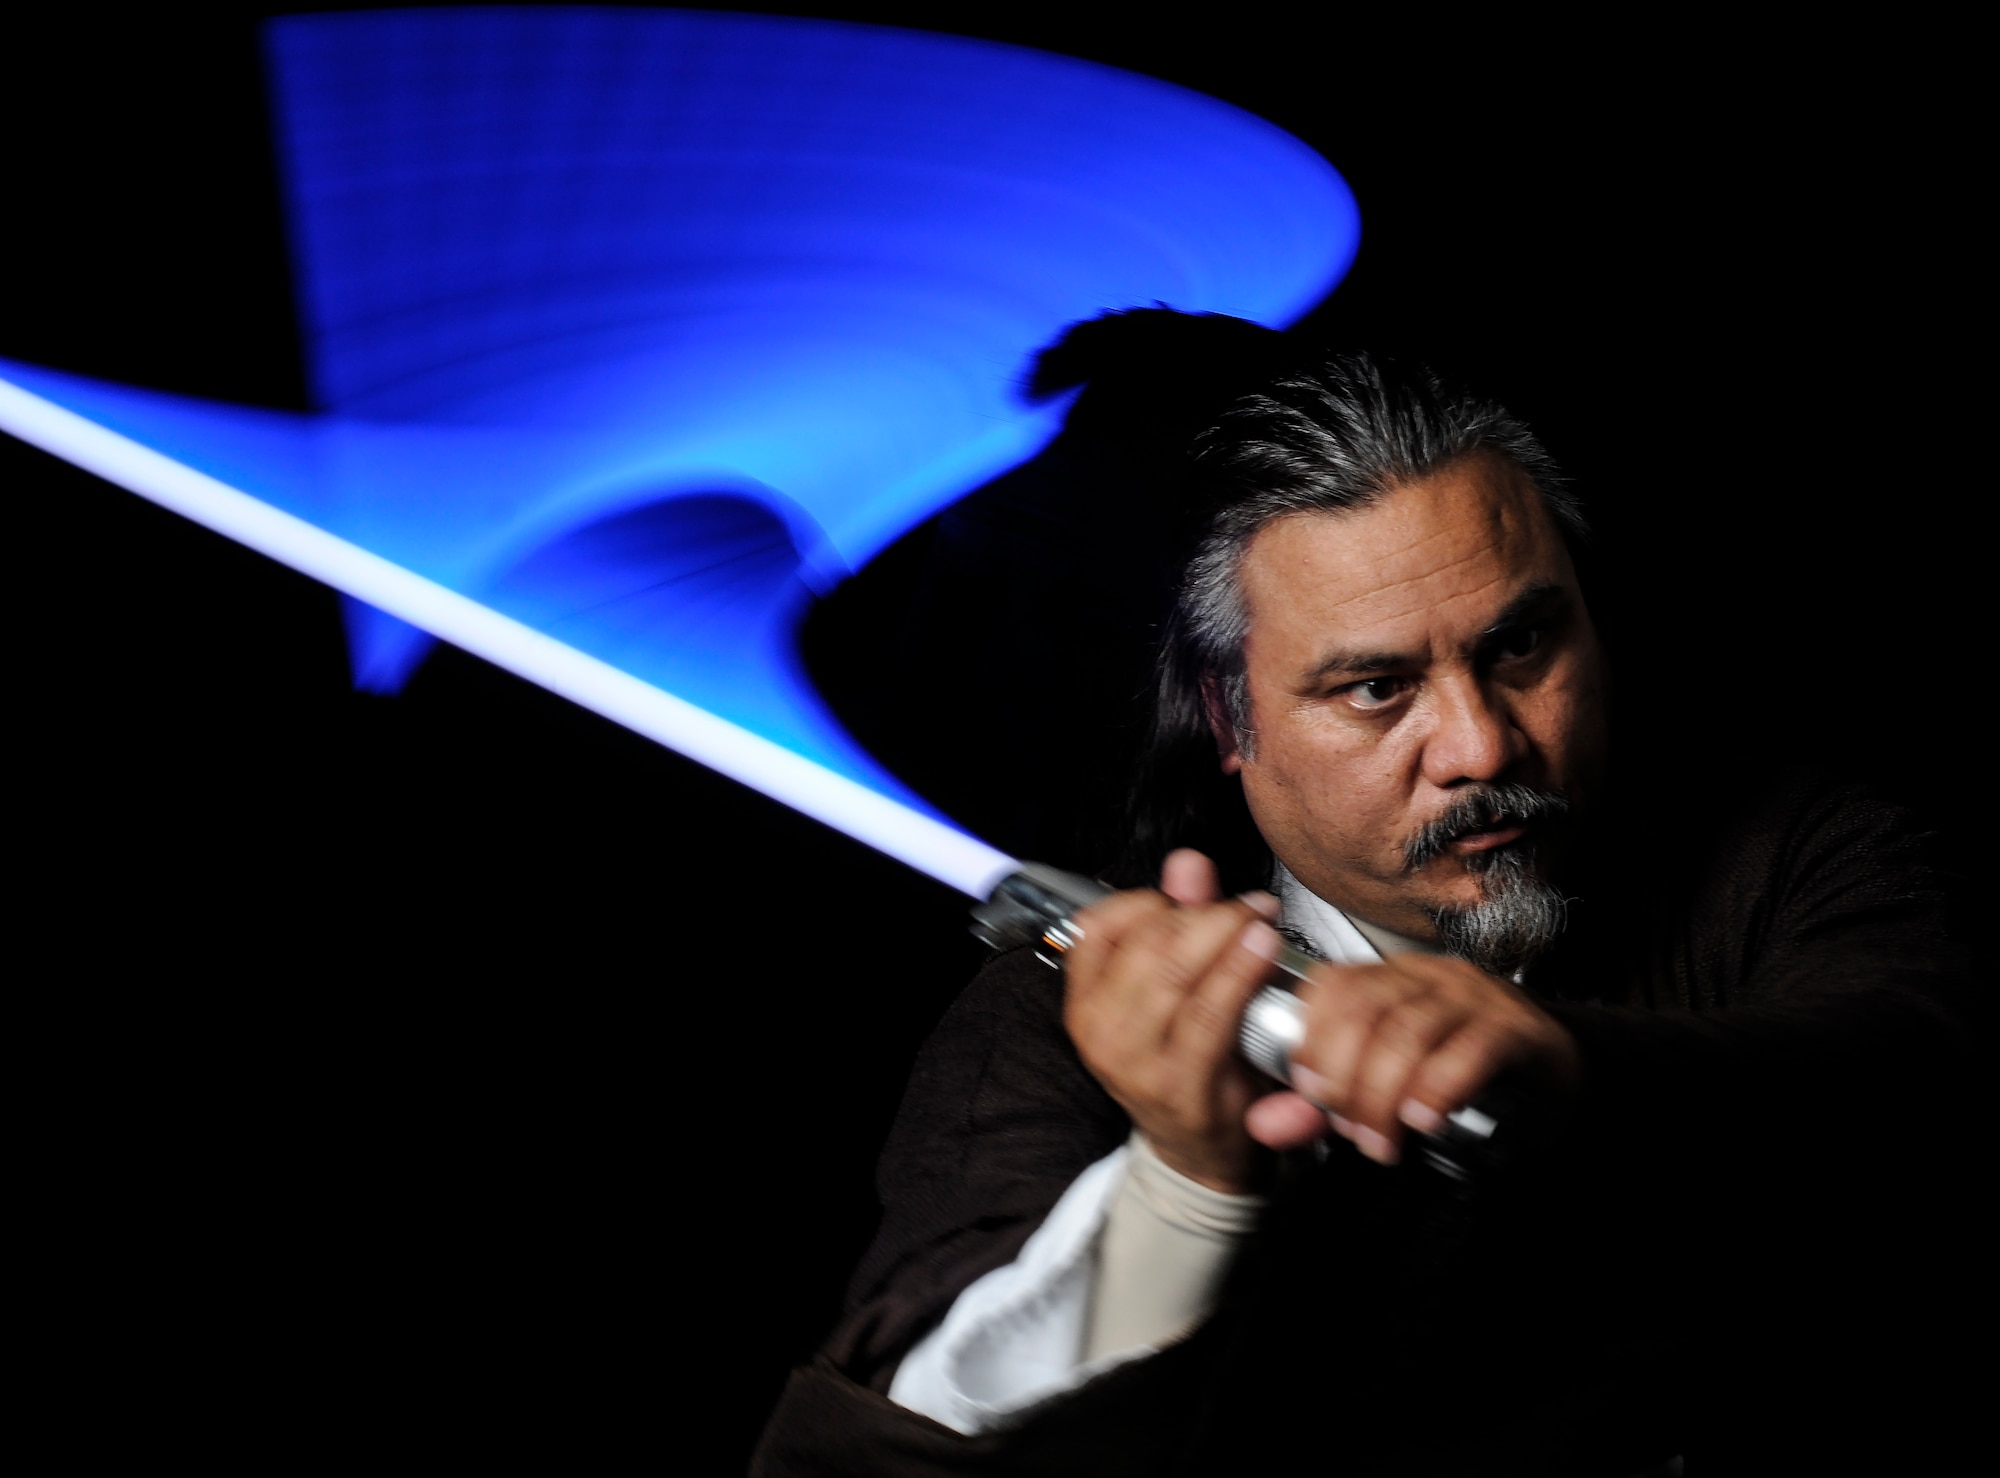 Randy Sena  wields his lightsaber while dressed in a Jedi costume he made himself. An avid cosplayer, Sena has won several awards for his designs. Sena is the 11th Wing chief of exercises at Joint Base Andrews, Md. (U.S. Air Force photo/Staff Sgt. Rob Cloys)